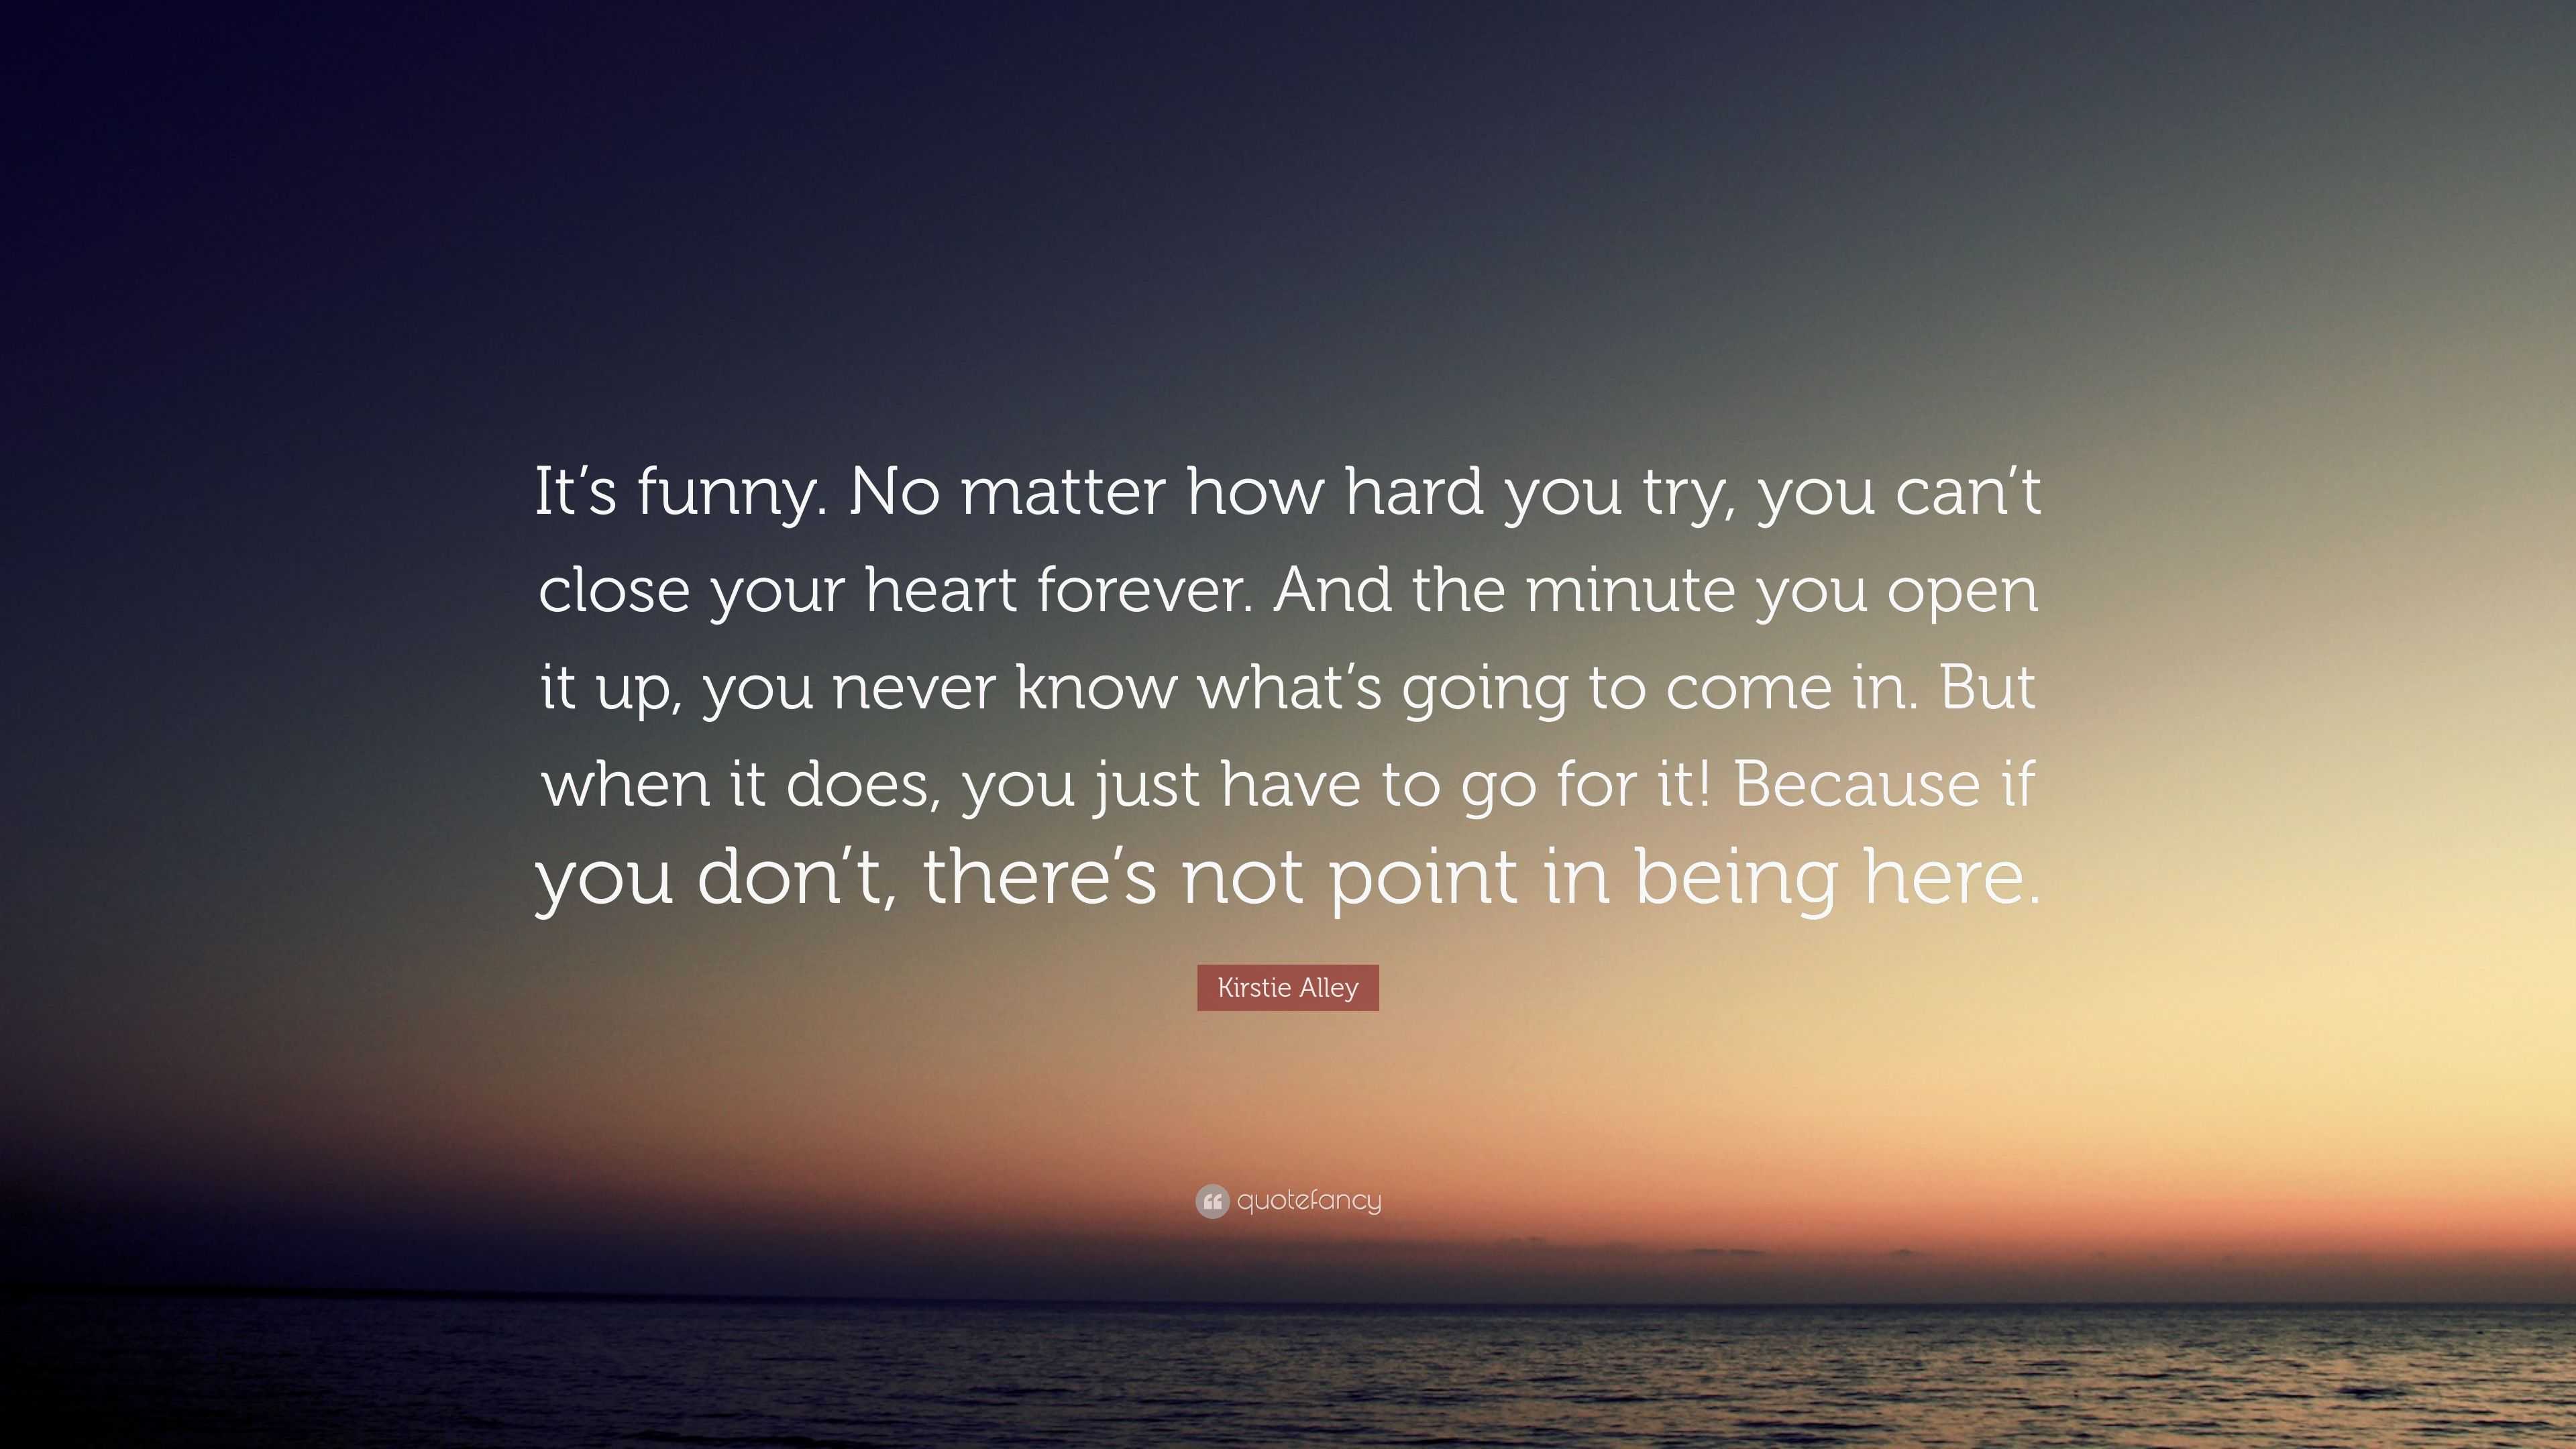 Kirstie Alley Quote: “It's Funny. No Matter How Hard You Try, You Can't Close Your Heart Forever. And The Minute You Open It Up, You Never Kno...”